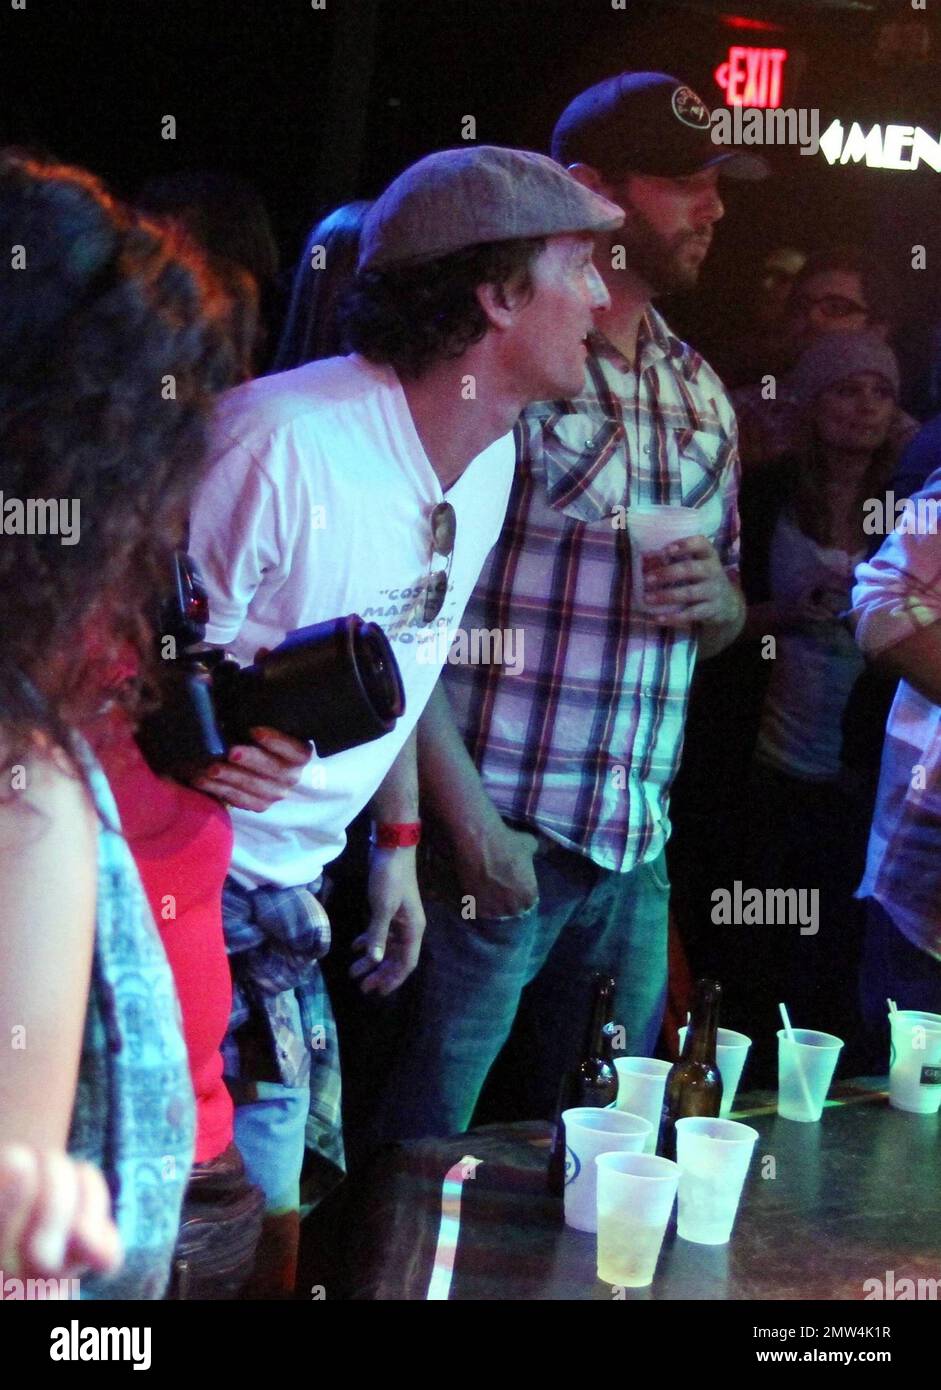 Matthew McConaughey attends a Mishka concert at the Roxy. Mishka is the first artist signed to McConaughey's j. k. livin label, which released the artist's third ablum, 'Above The Bones,' the debut release for the label. Los Angeles, CA. 3/23/10. Stock Photo